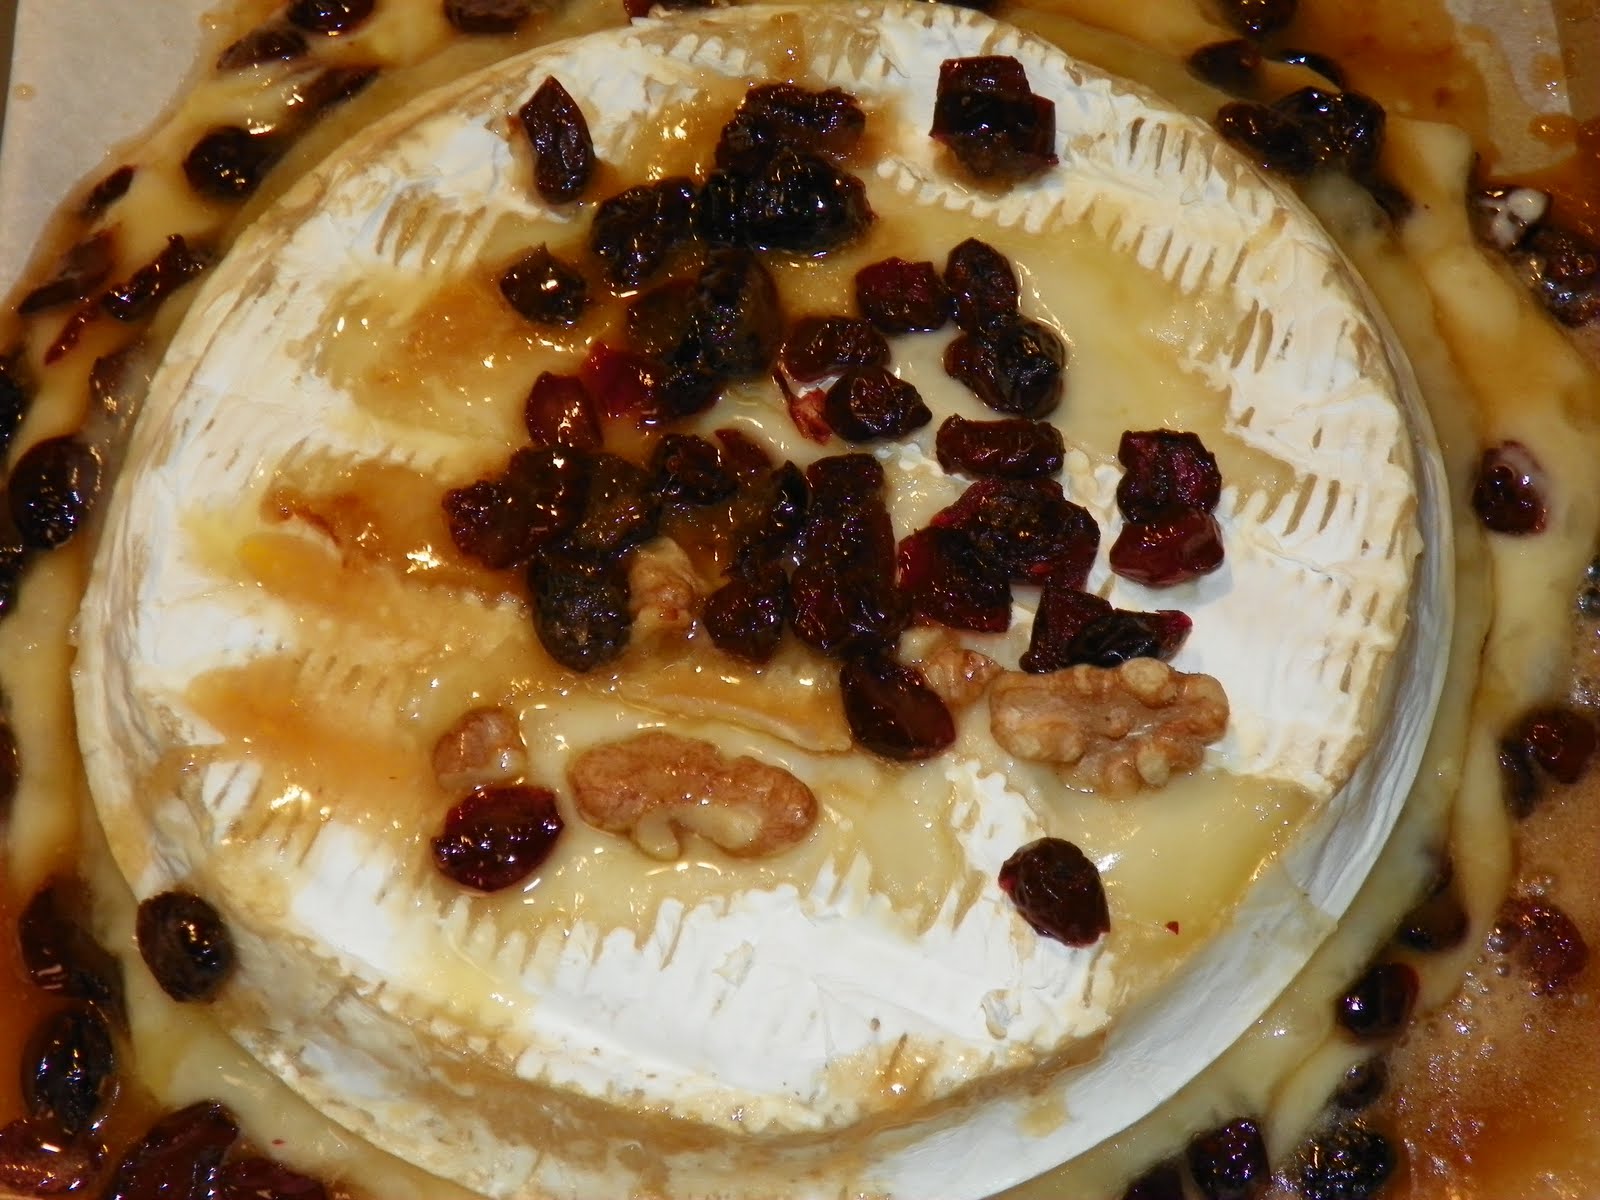 Baked Brie with Cranberries and Candied Walnuts